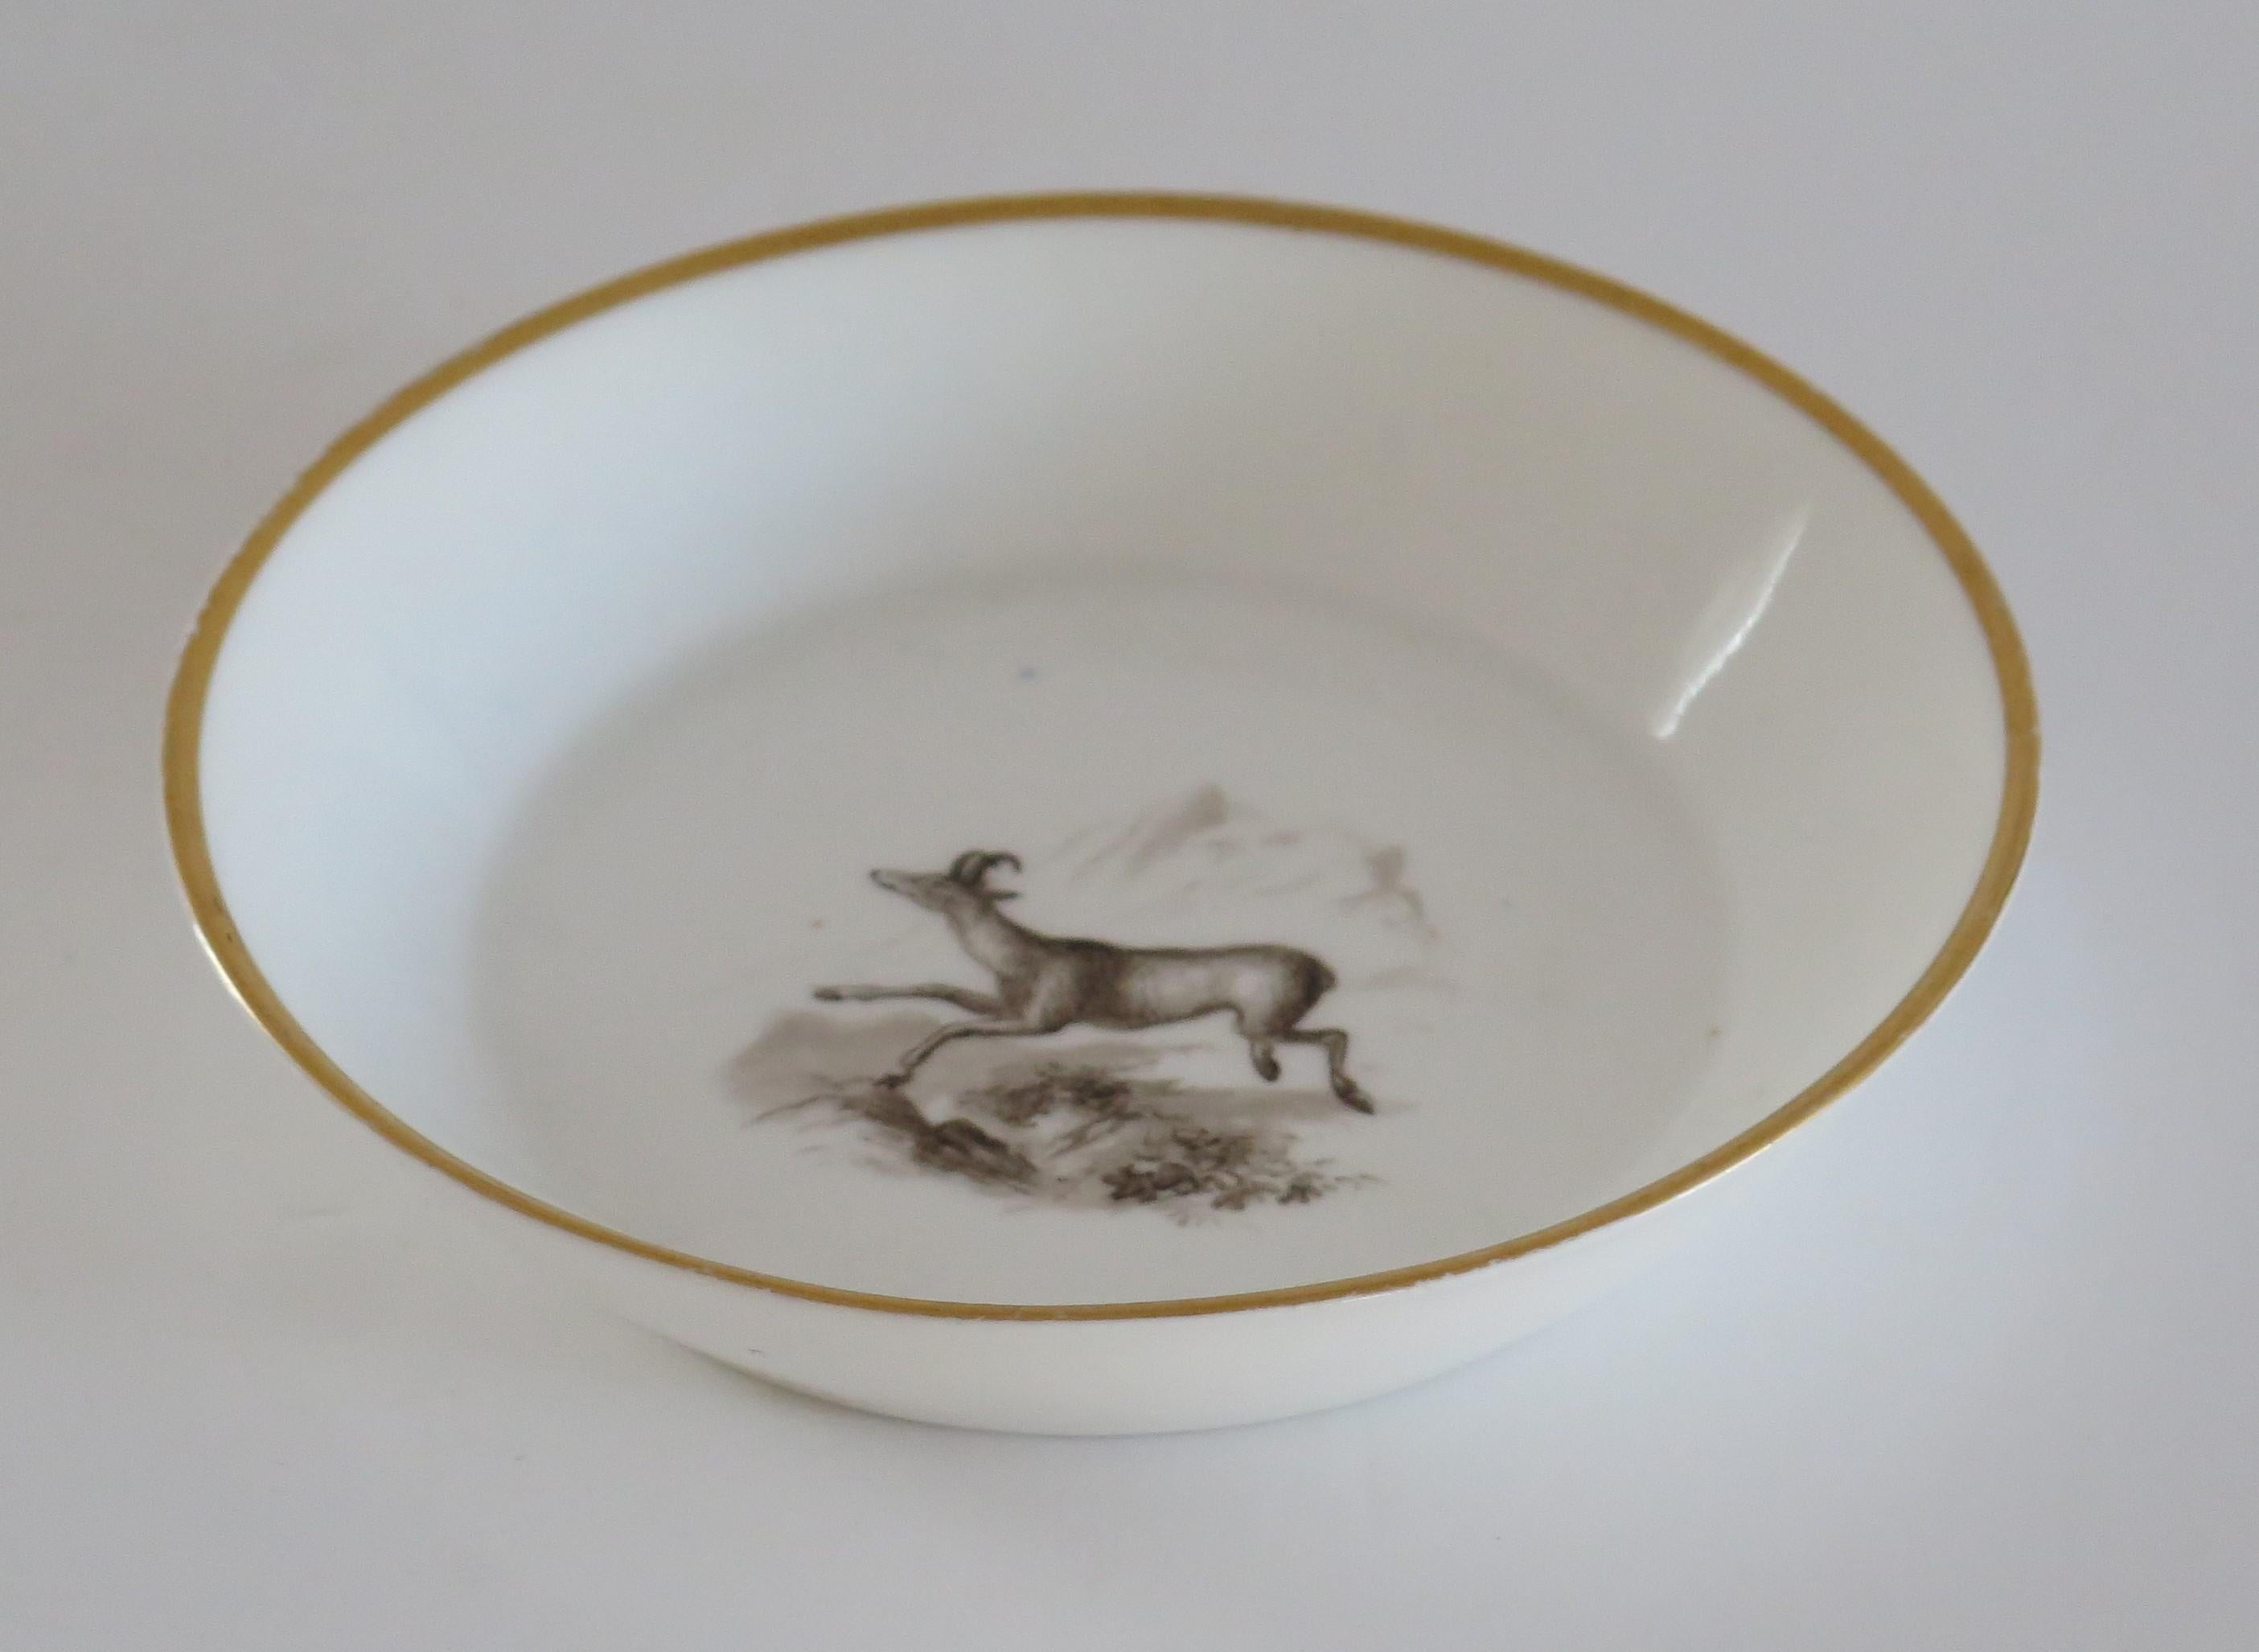 This is a very beautiful porcelain saucer made by a French Paris maker, dating to the early 19th century, circa 1810.

The saucer is very well painted 